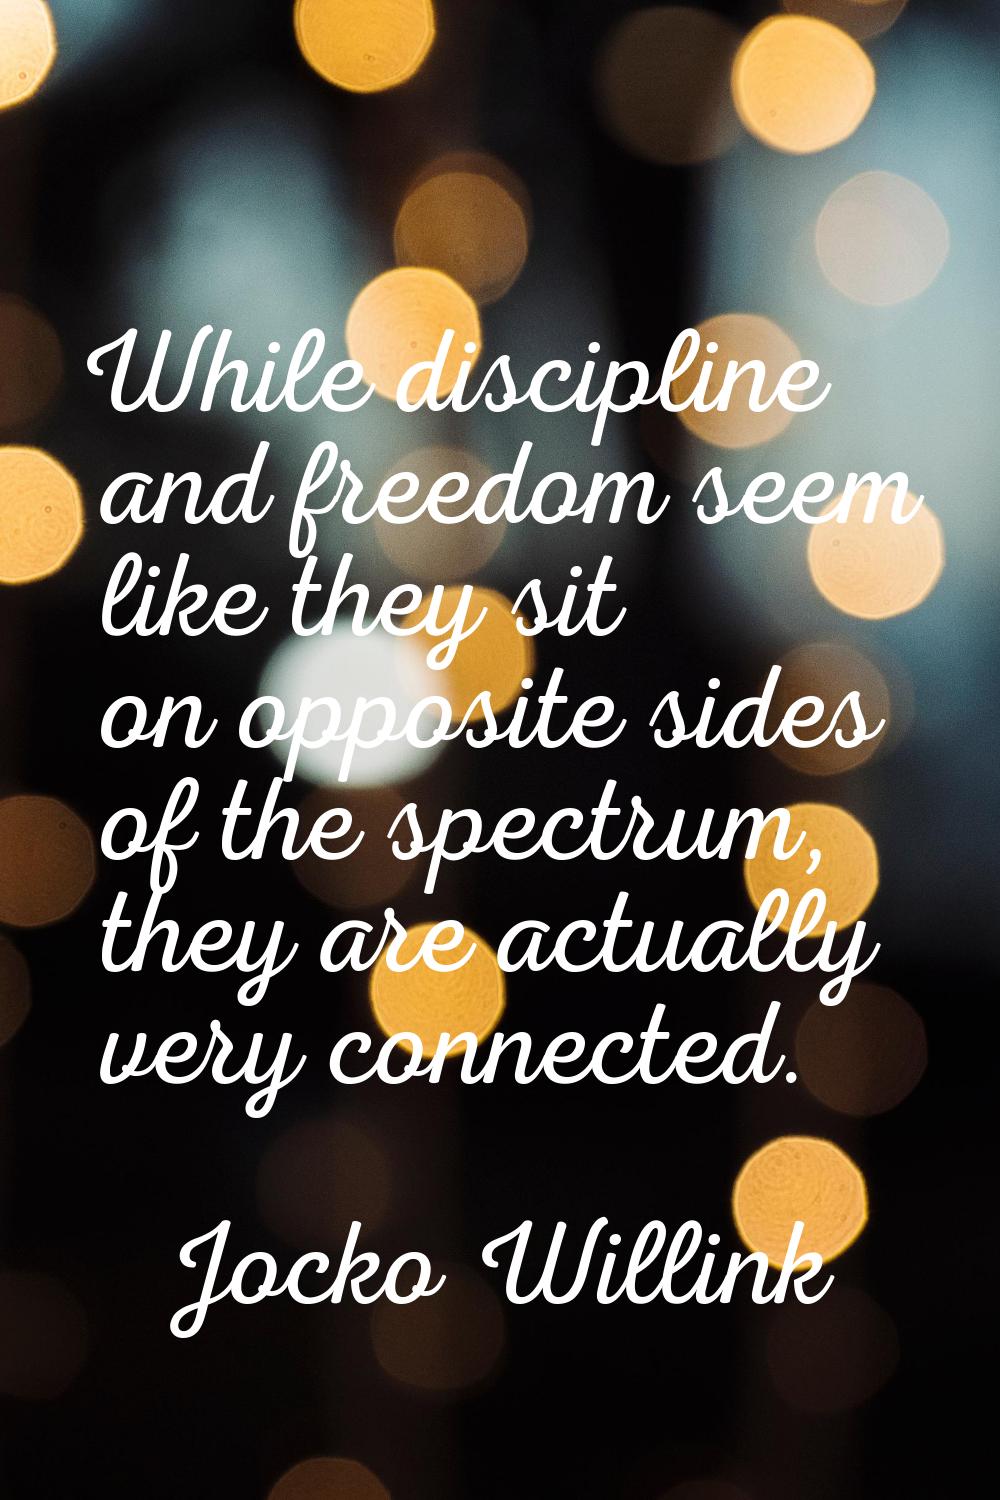 While discipline and freedom seem like they sit on opposite sides of the spectrum, they are actuall